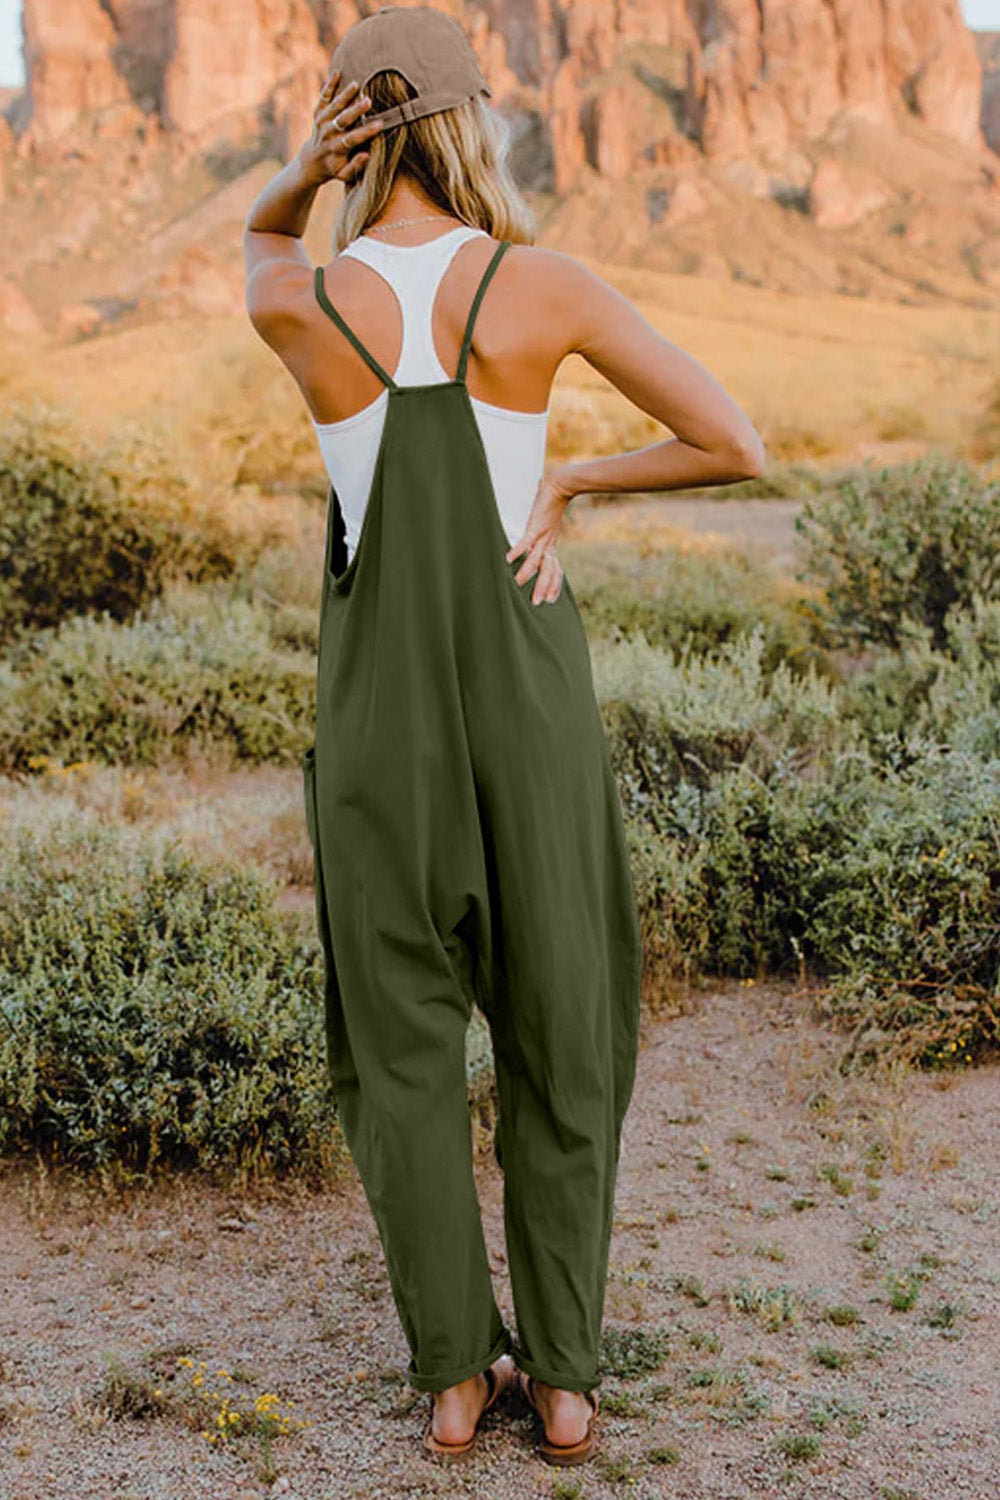 Double Take  V-Neck Sleeveless Jumpsuit with Pocket Additional Options Available